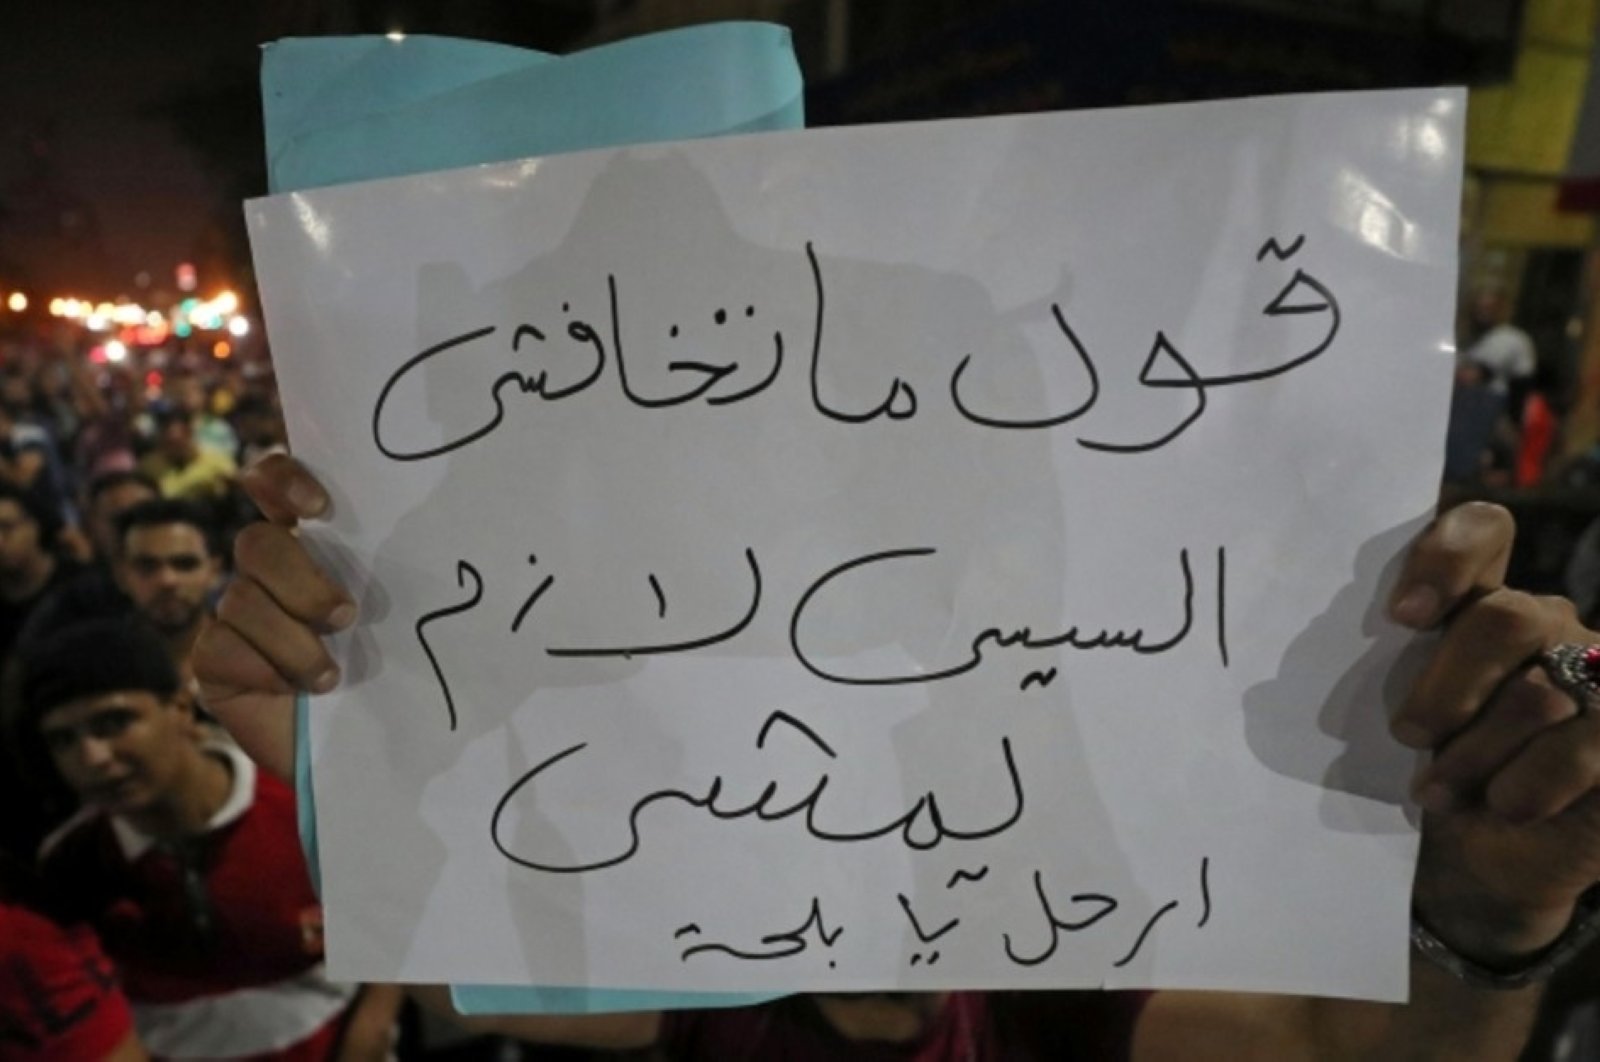 A protester carries a sign that reads, "Don't be afraid; say, el-Sissi must leave Cairo," Sept. 21, 2019. (Reuters Photo)